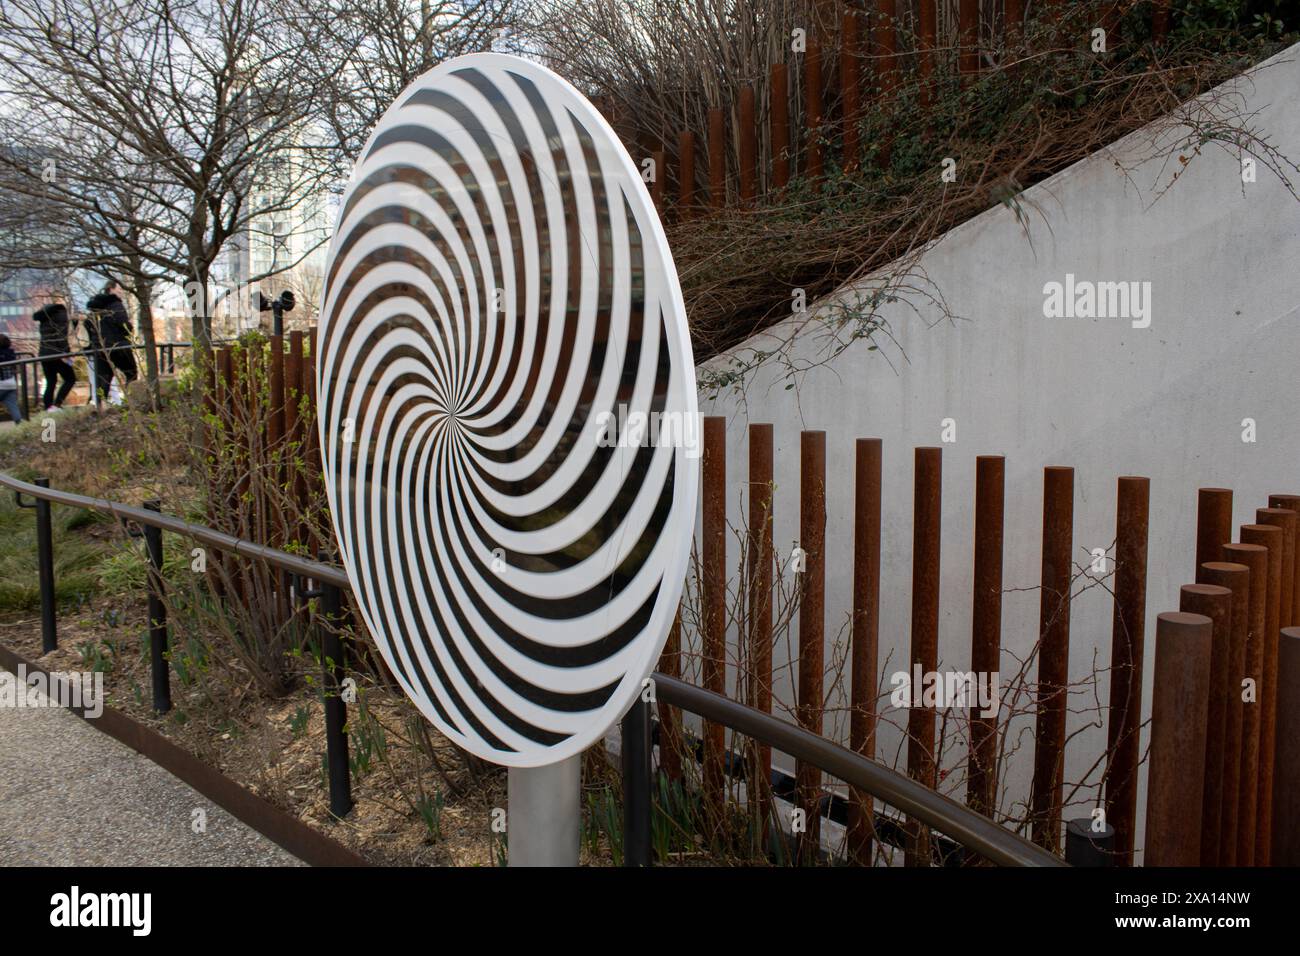 A painted sculpture on a street-side fence Stock Photo